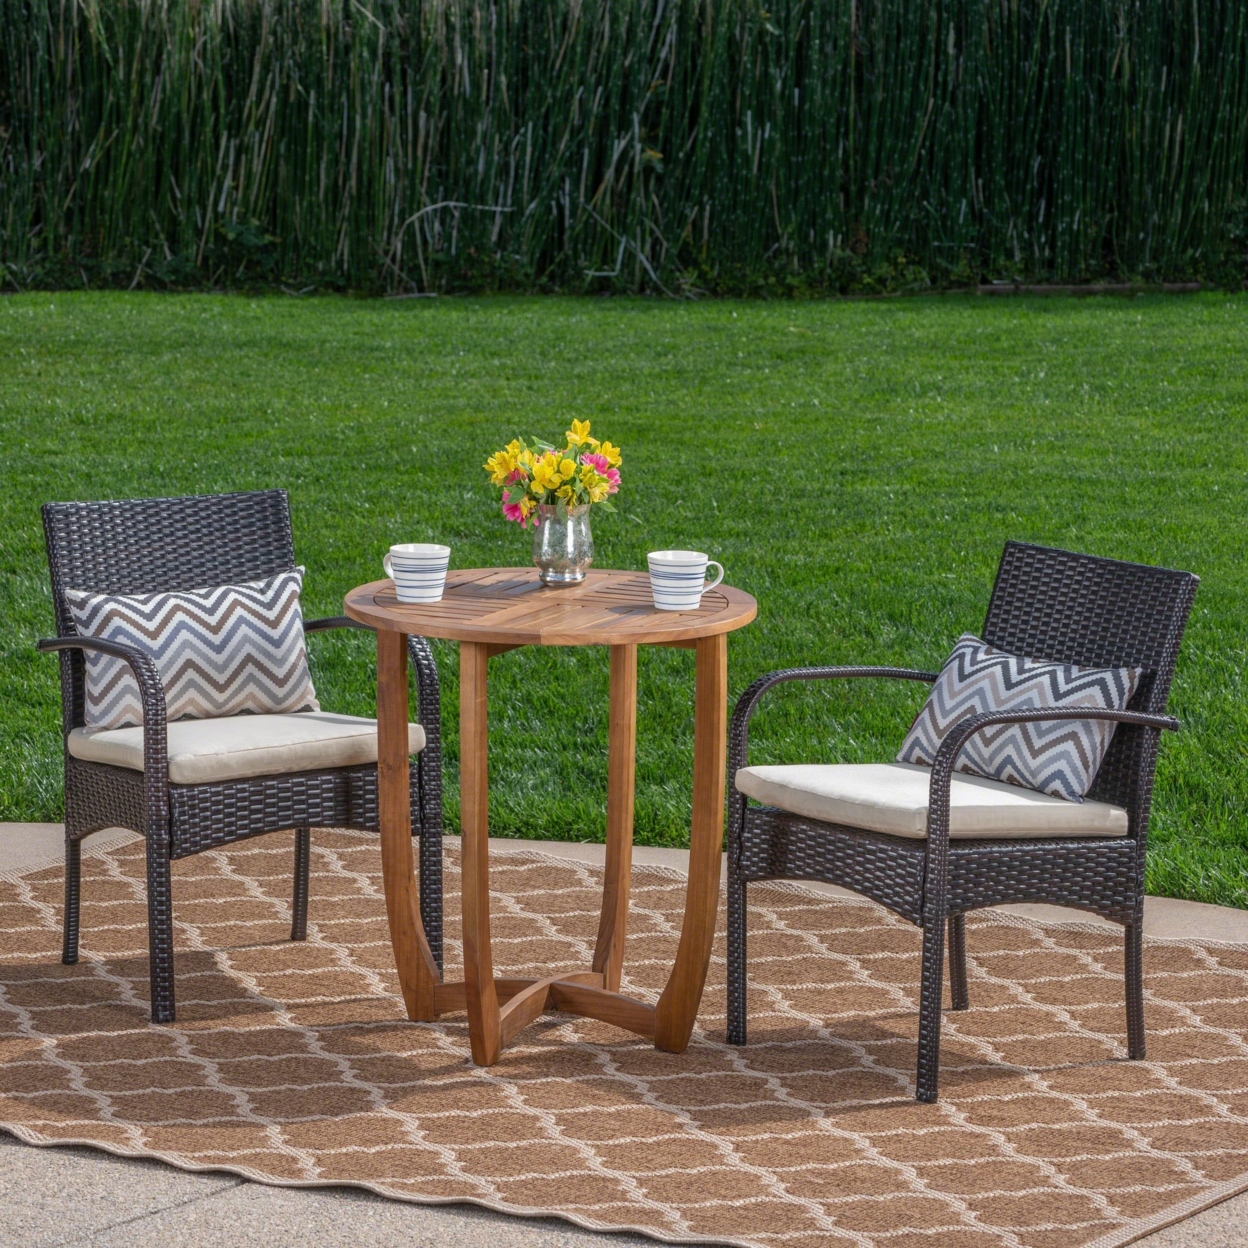 Andy Outdoor 3 Piece Acacia Wood/ Wicker Bistro Set With Cushions, Teak Finish And Multibrown With CrÌ¬me